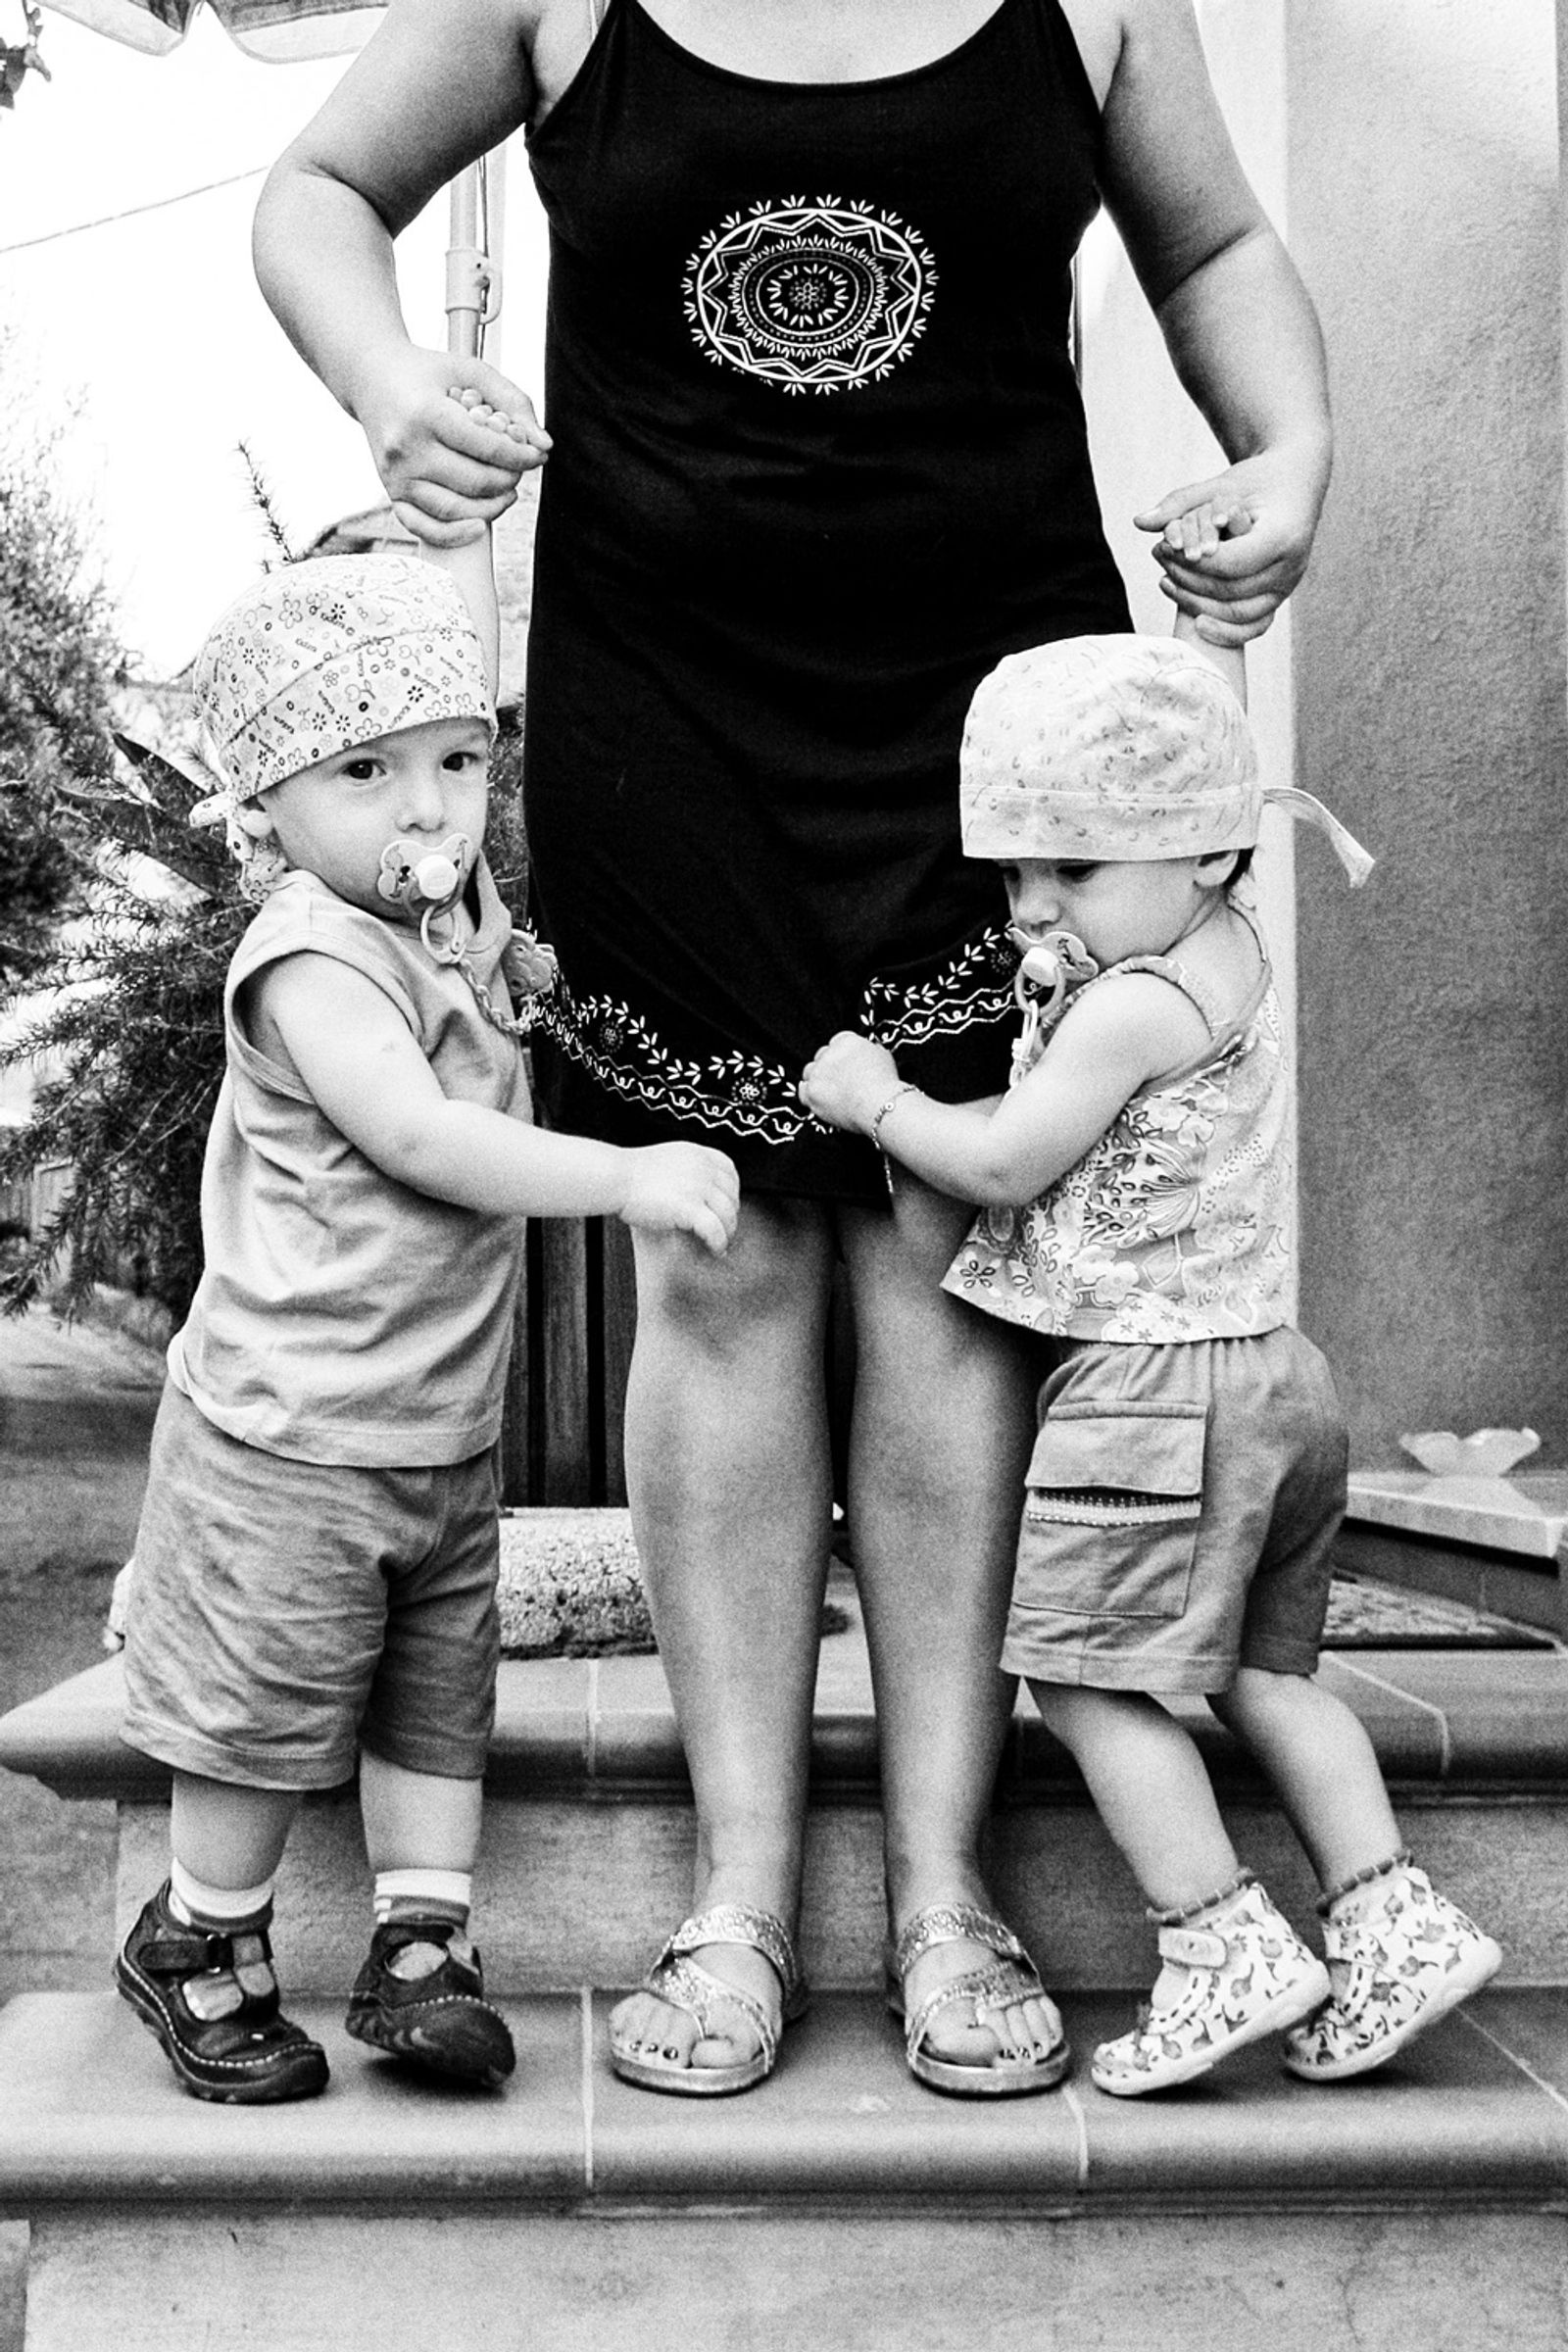 © BARBARA ZANON - 2007: Riccardo and Luisa, 1.5 years old, with Emilia, their Mother